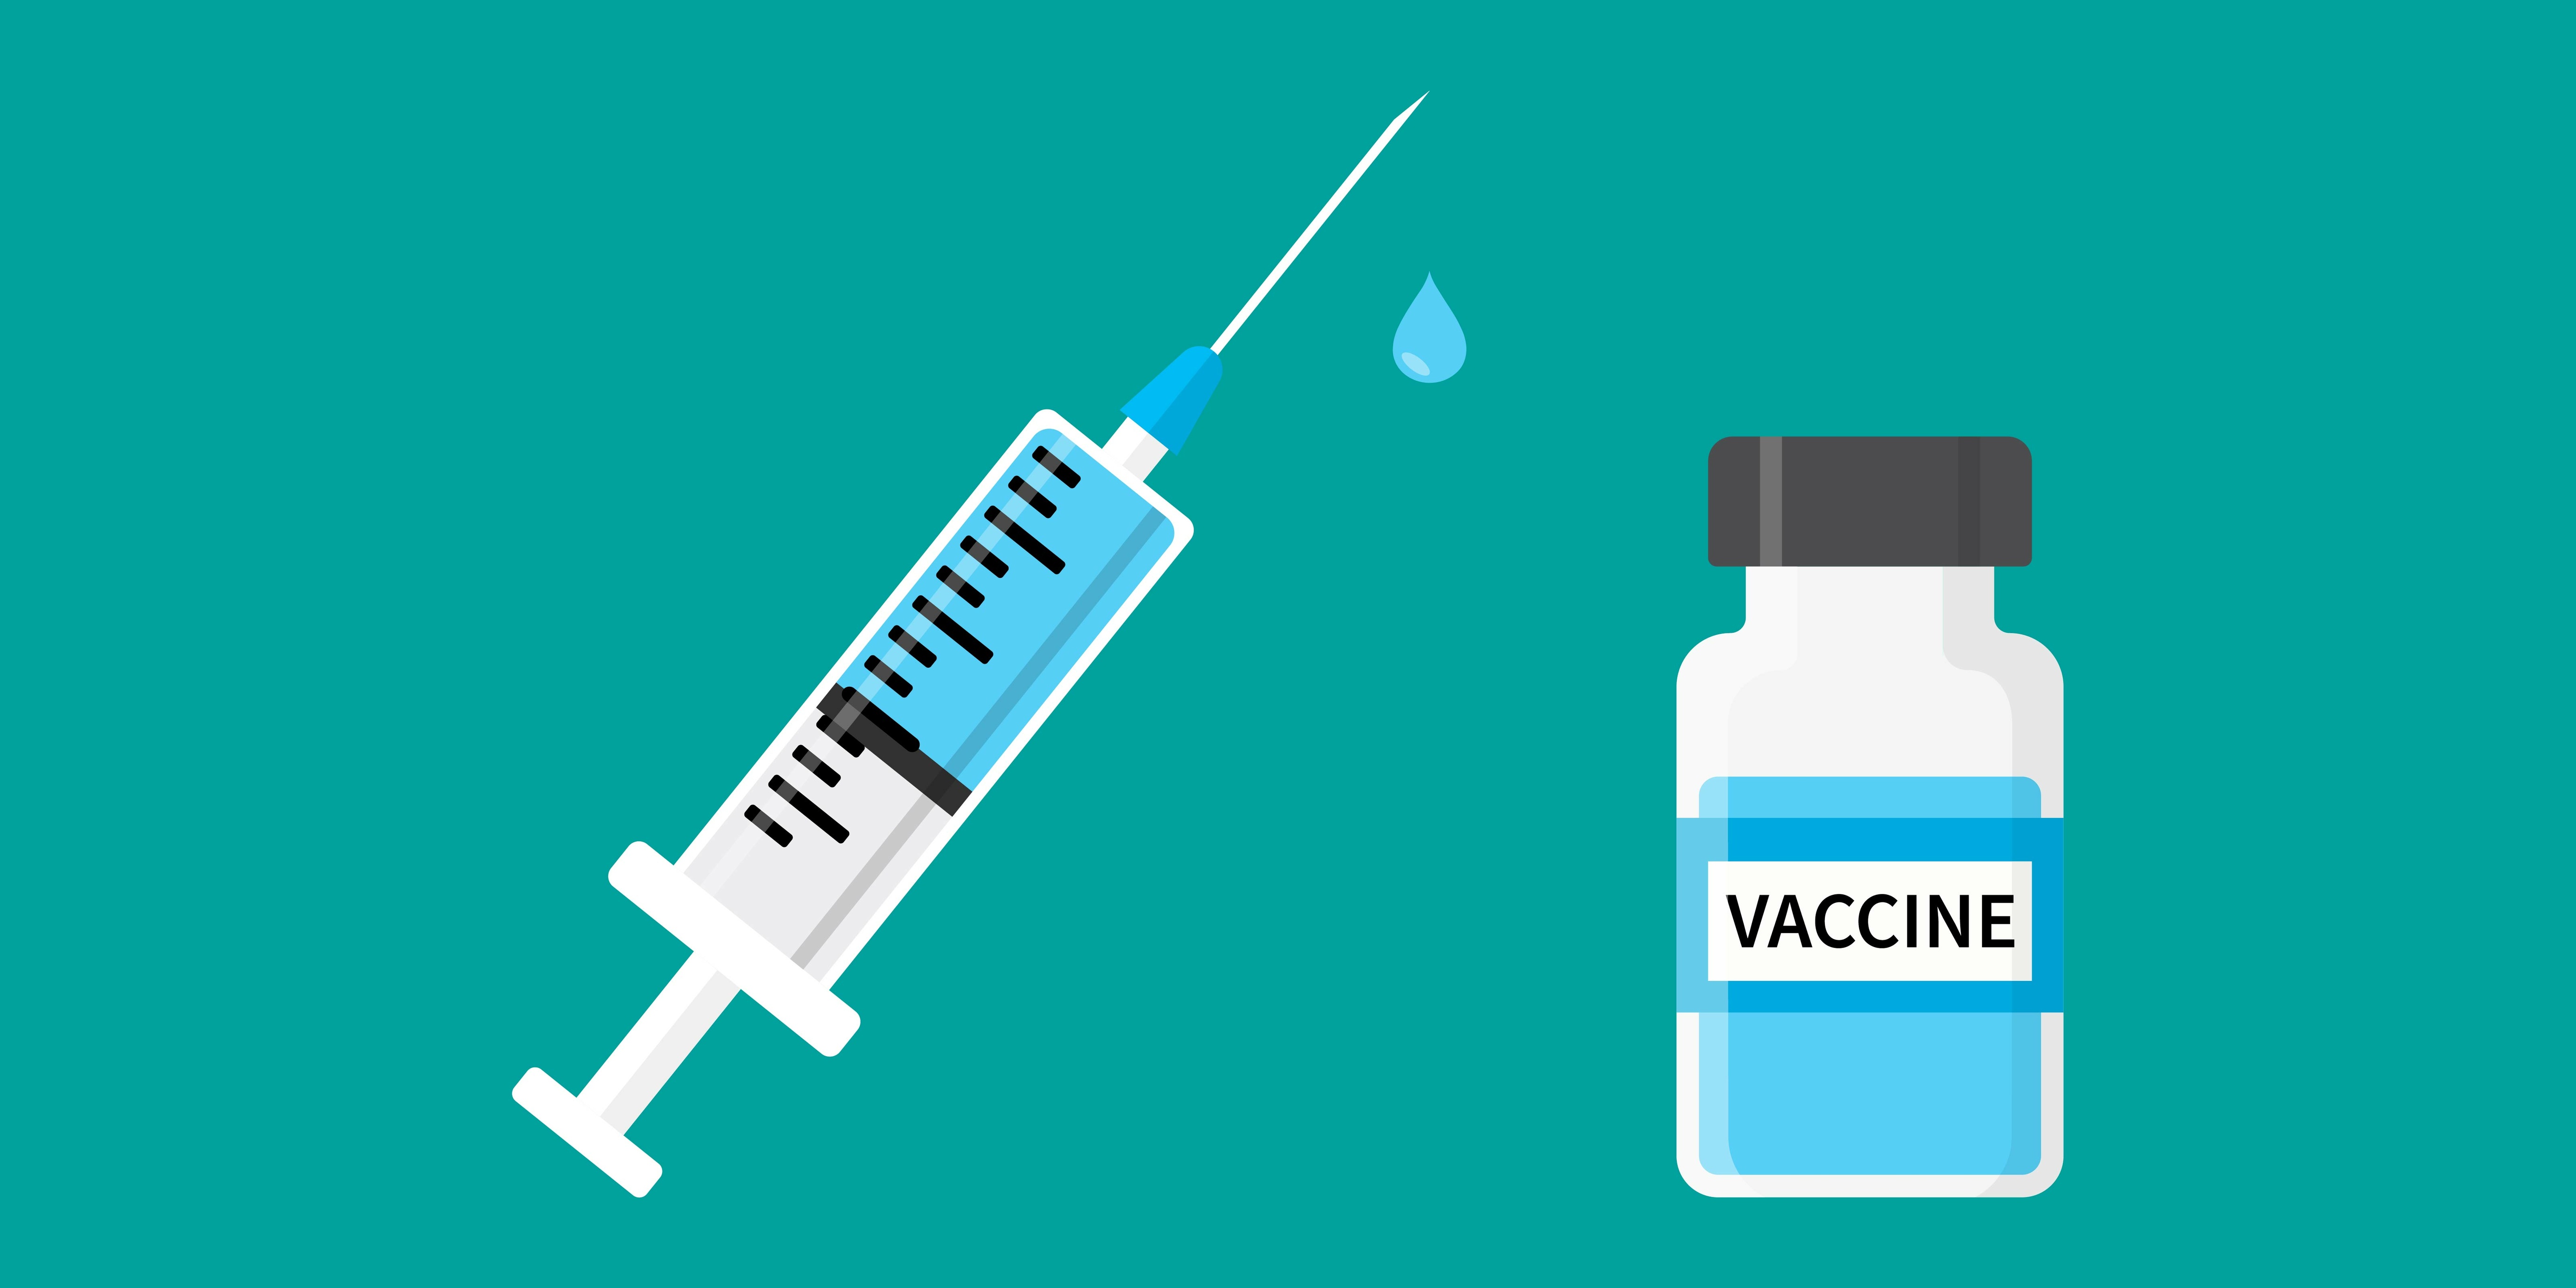 Lessons Learned From My Patient About Vaccination